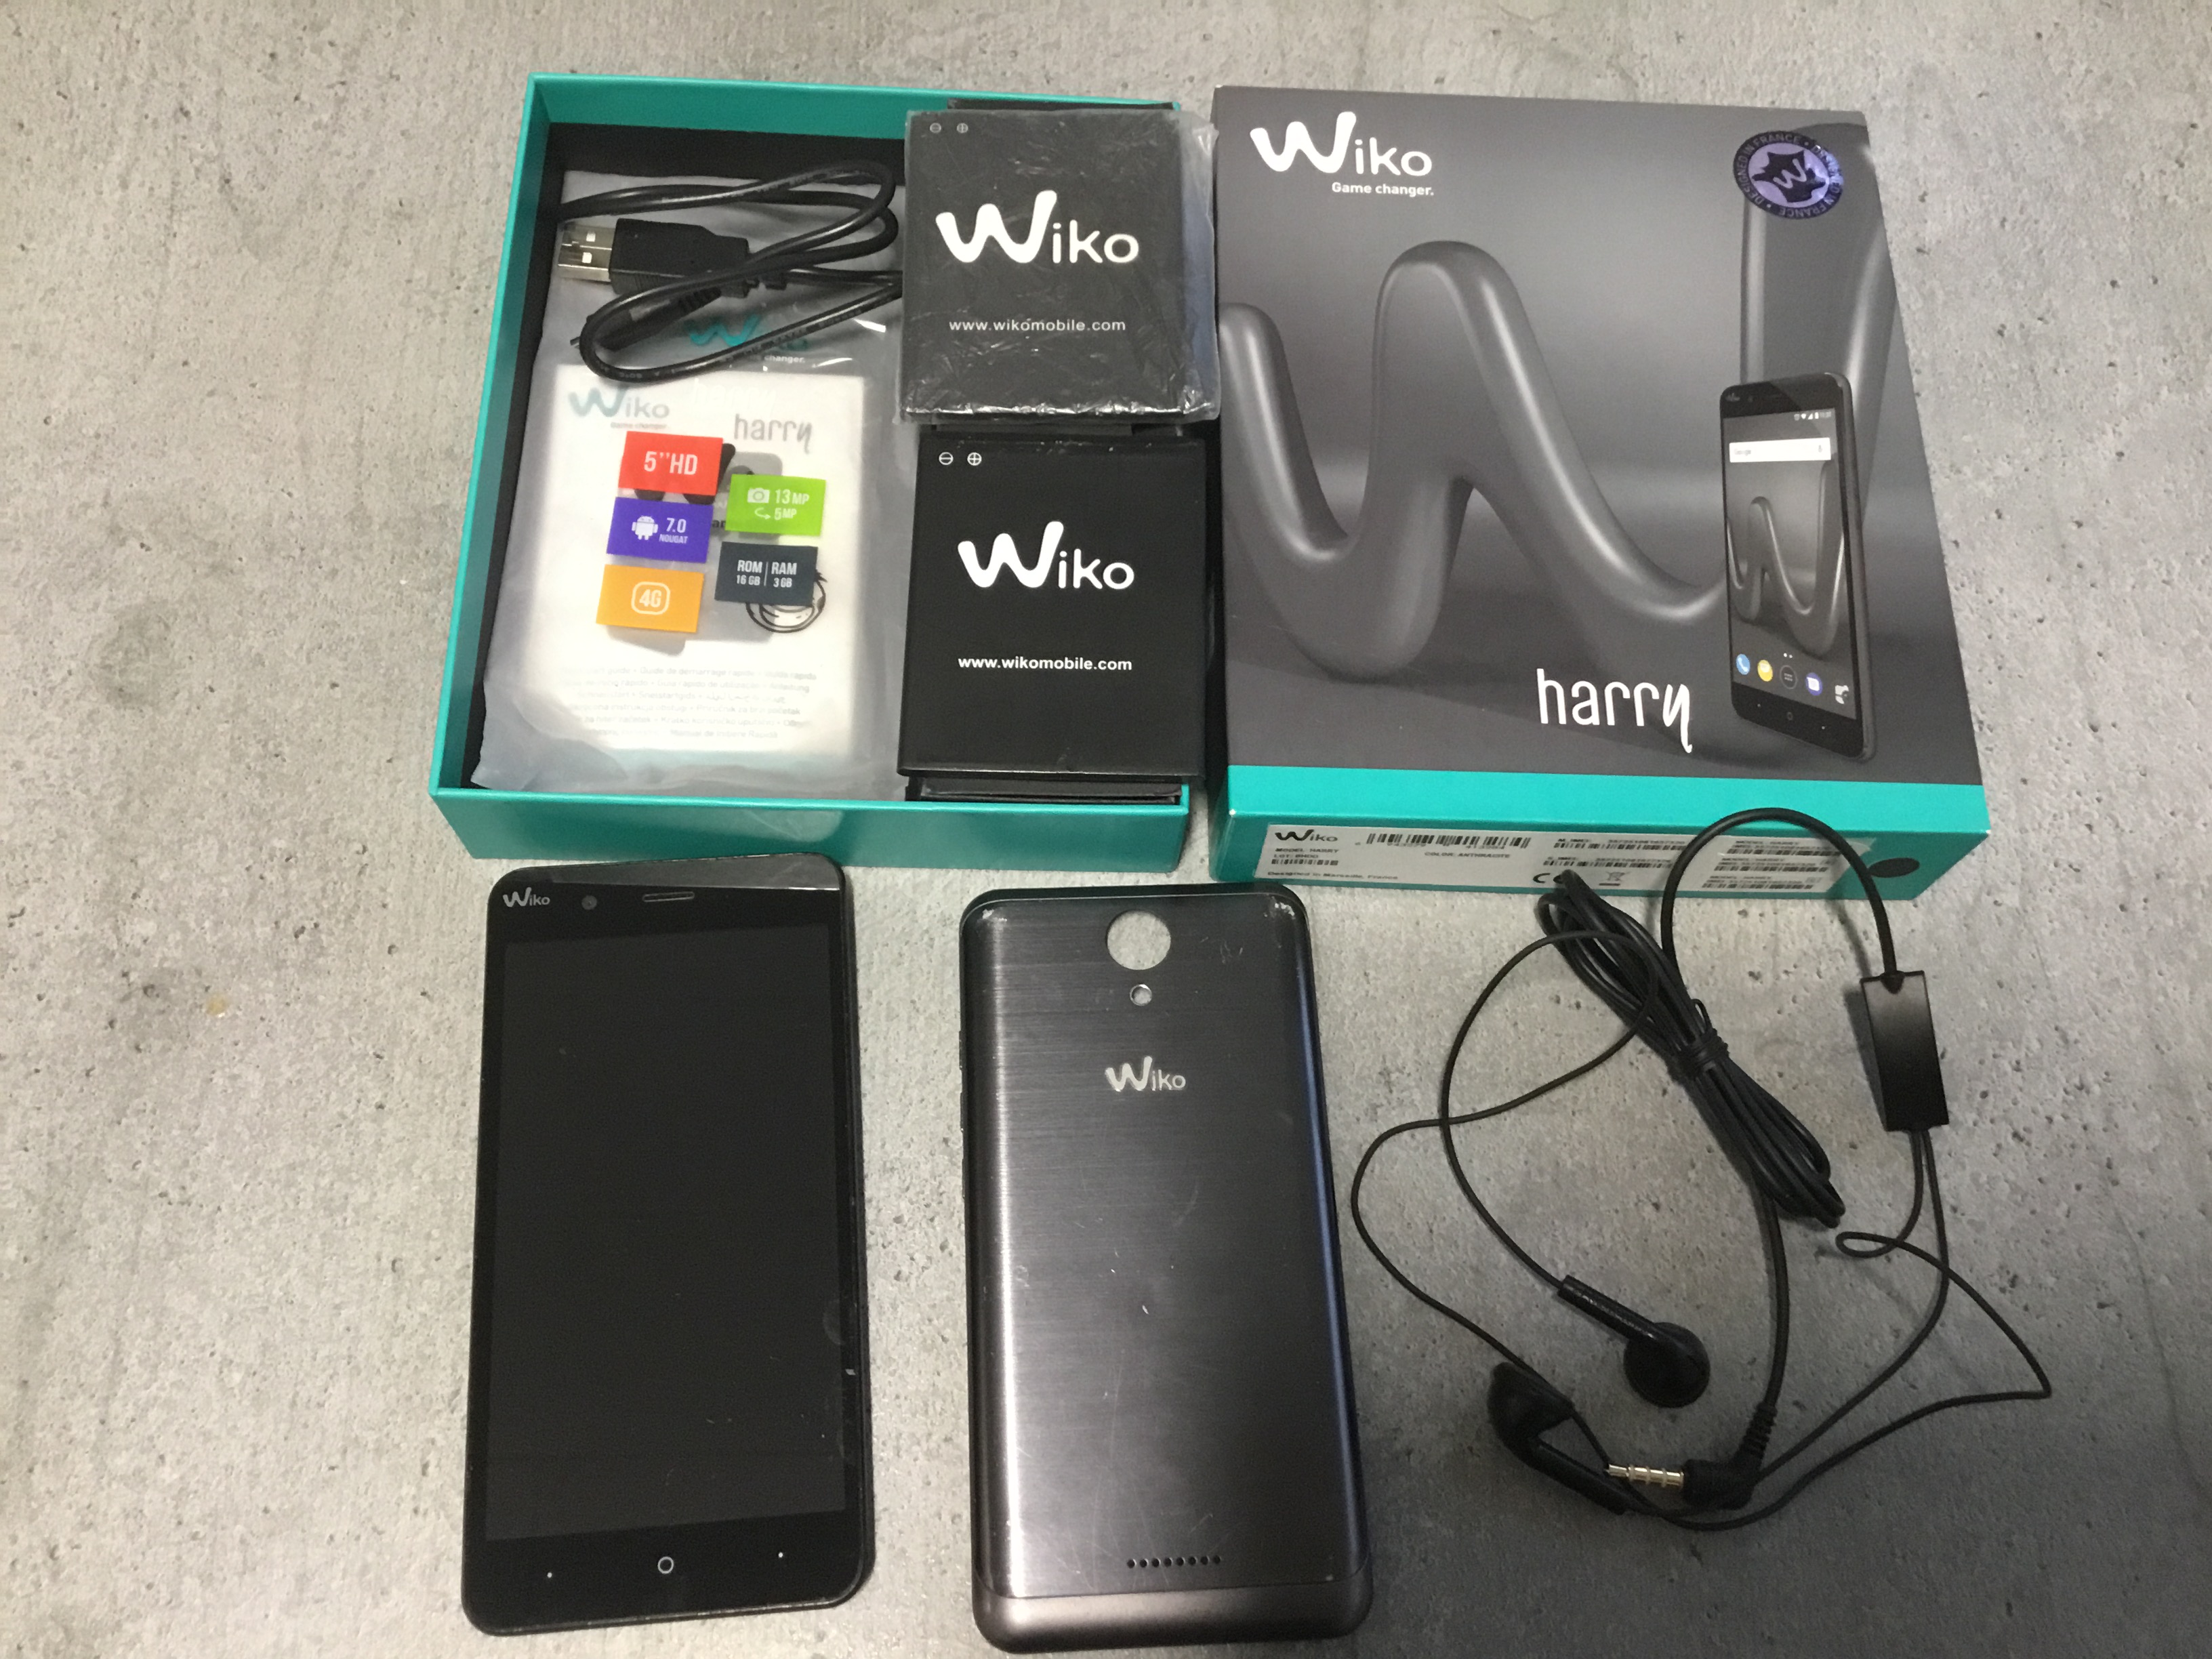 A vendre gsm Wiko Harry 